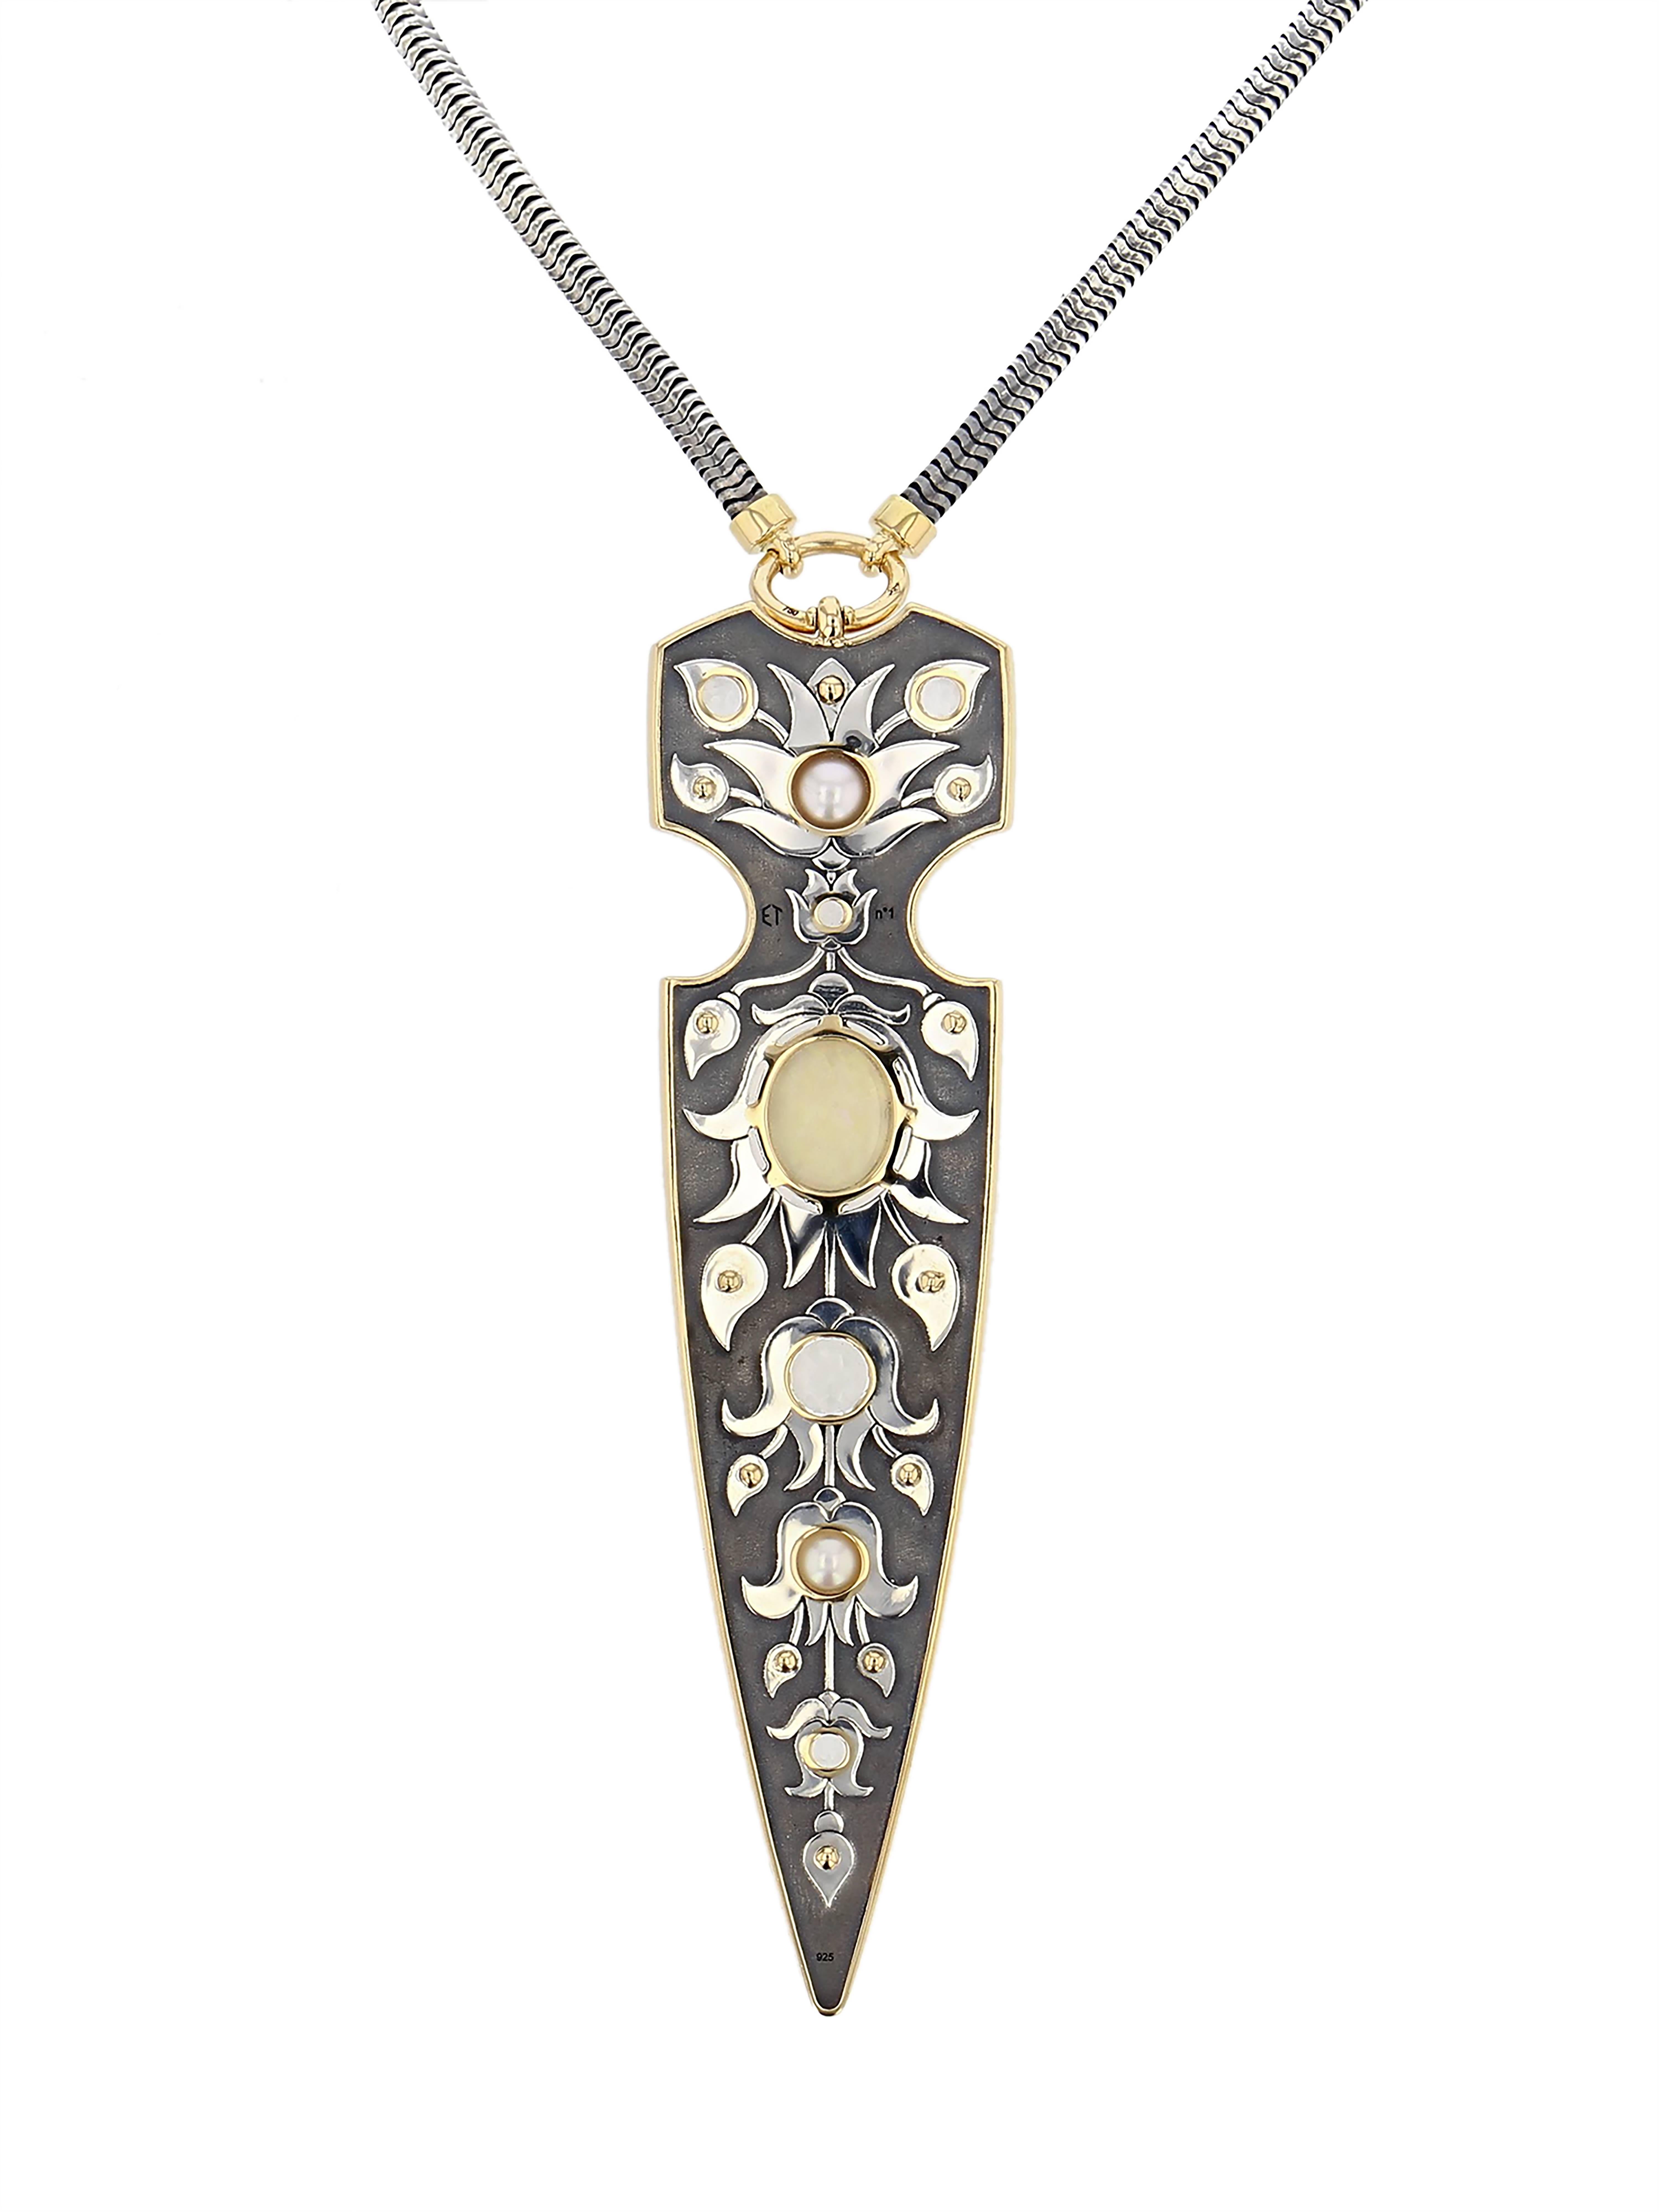 Pendentif Dague Opale Or Jaune Diamants

Dagger necklace mounted on a patinated silver chain with a pendant whose contours and claws are in yellow gold. The dagger is set with 12 yellow gold spikes, a variation of 5 topazes, 2 Akoya pearls and an